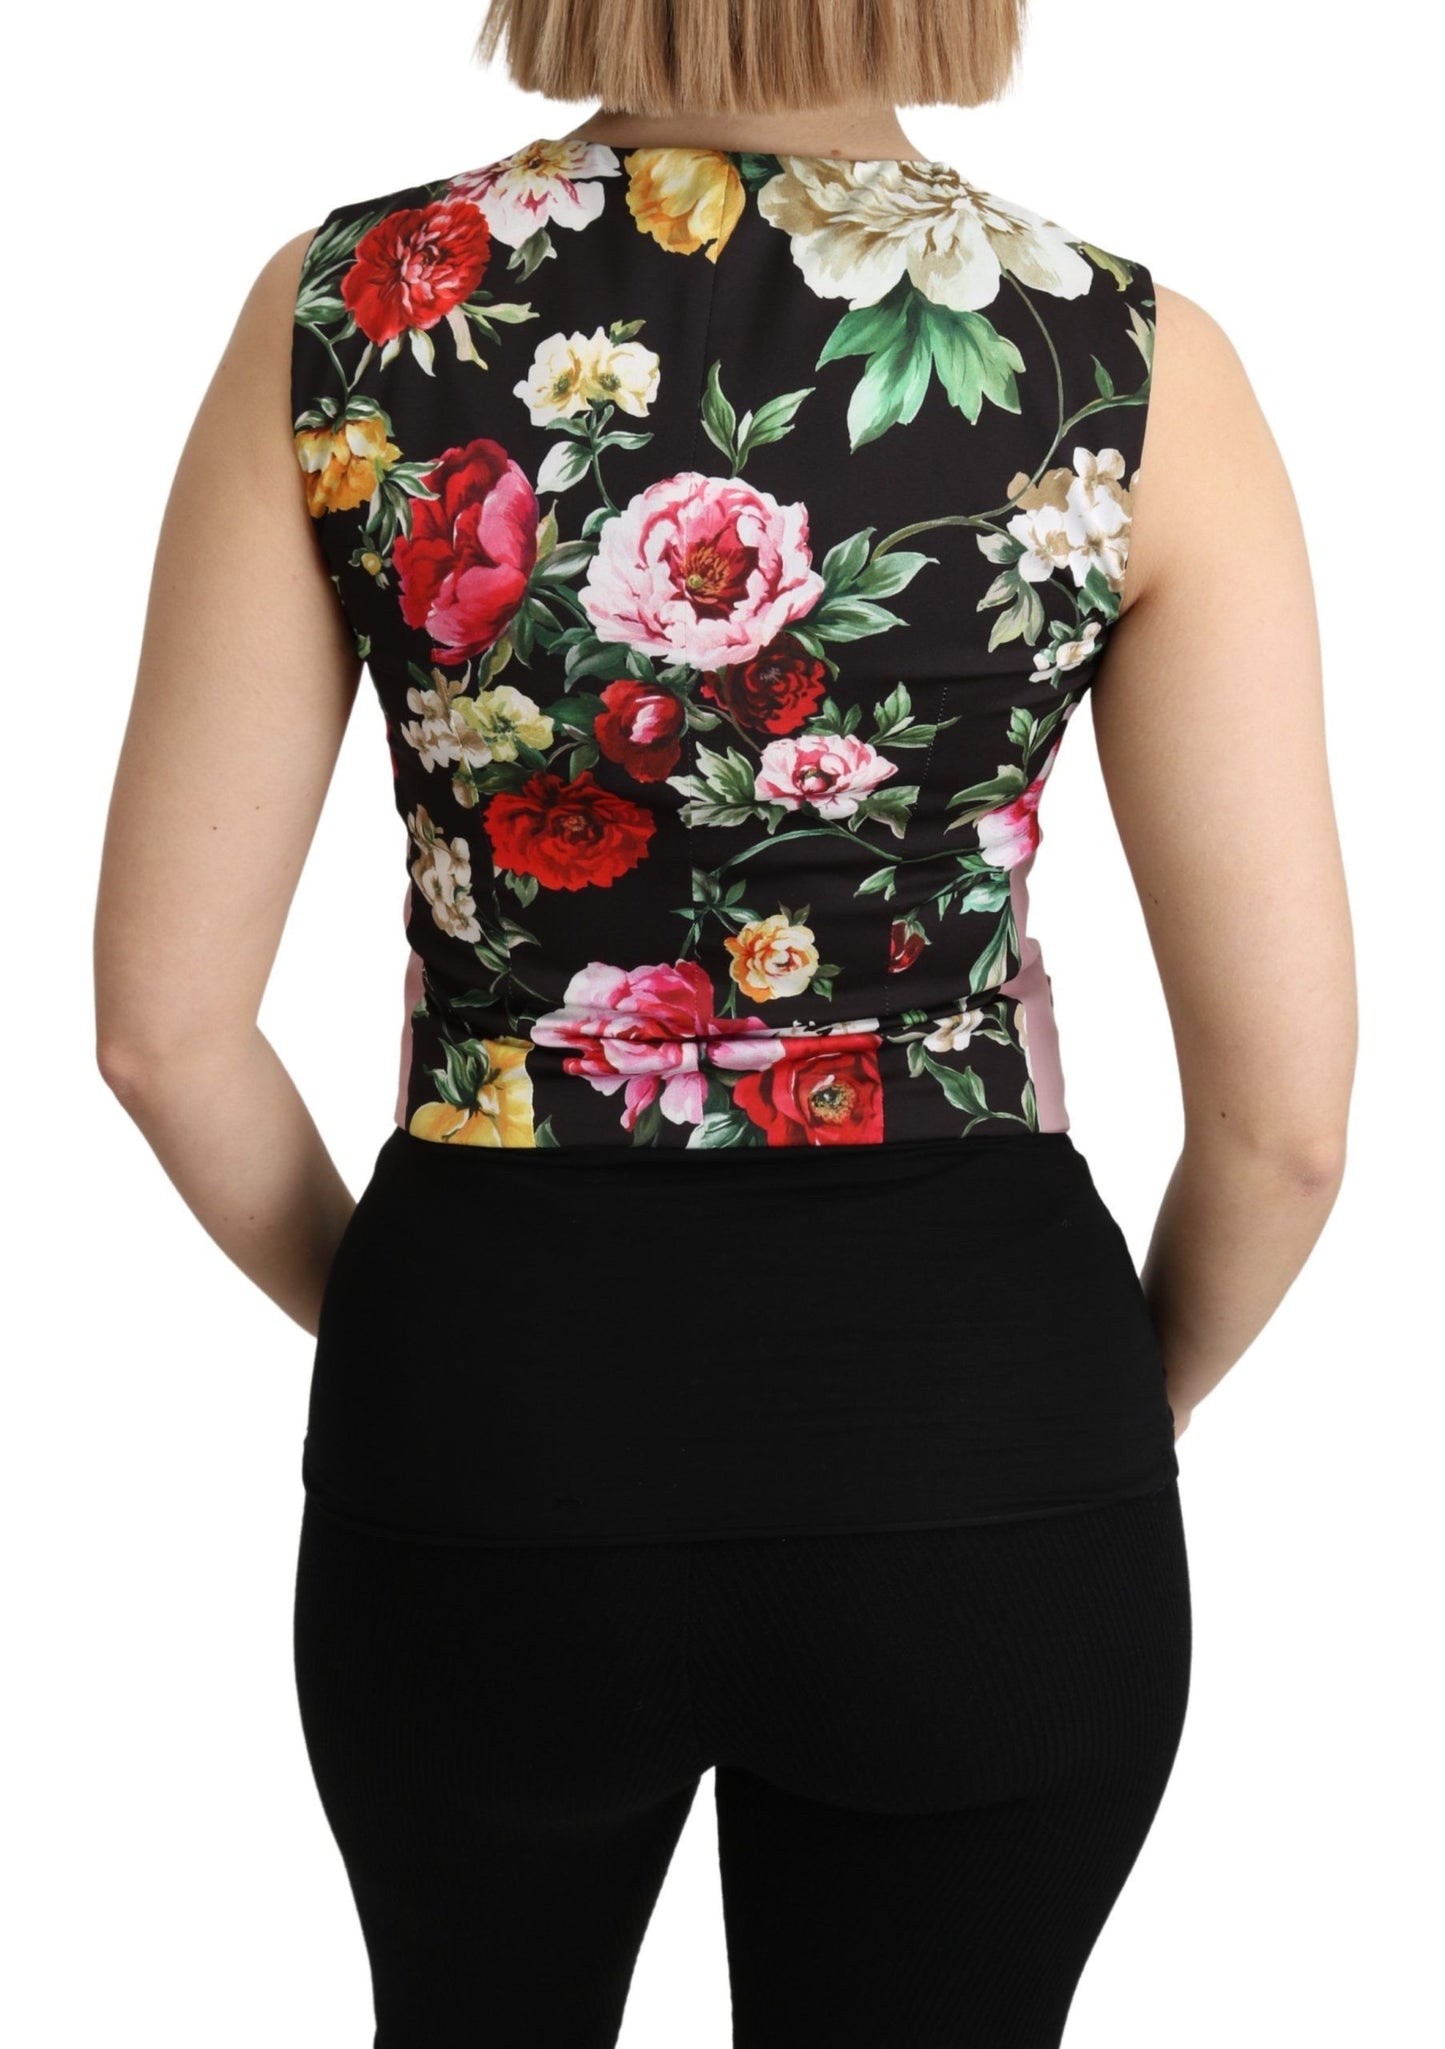 Dolce & Gabbana Chic Sleeveless Vest in Pink Hues